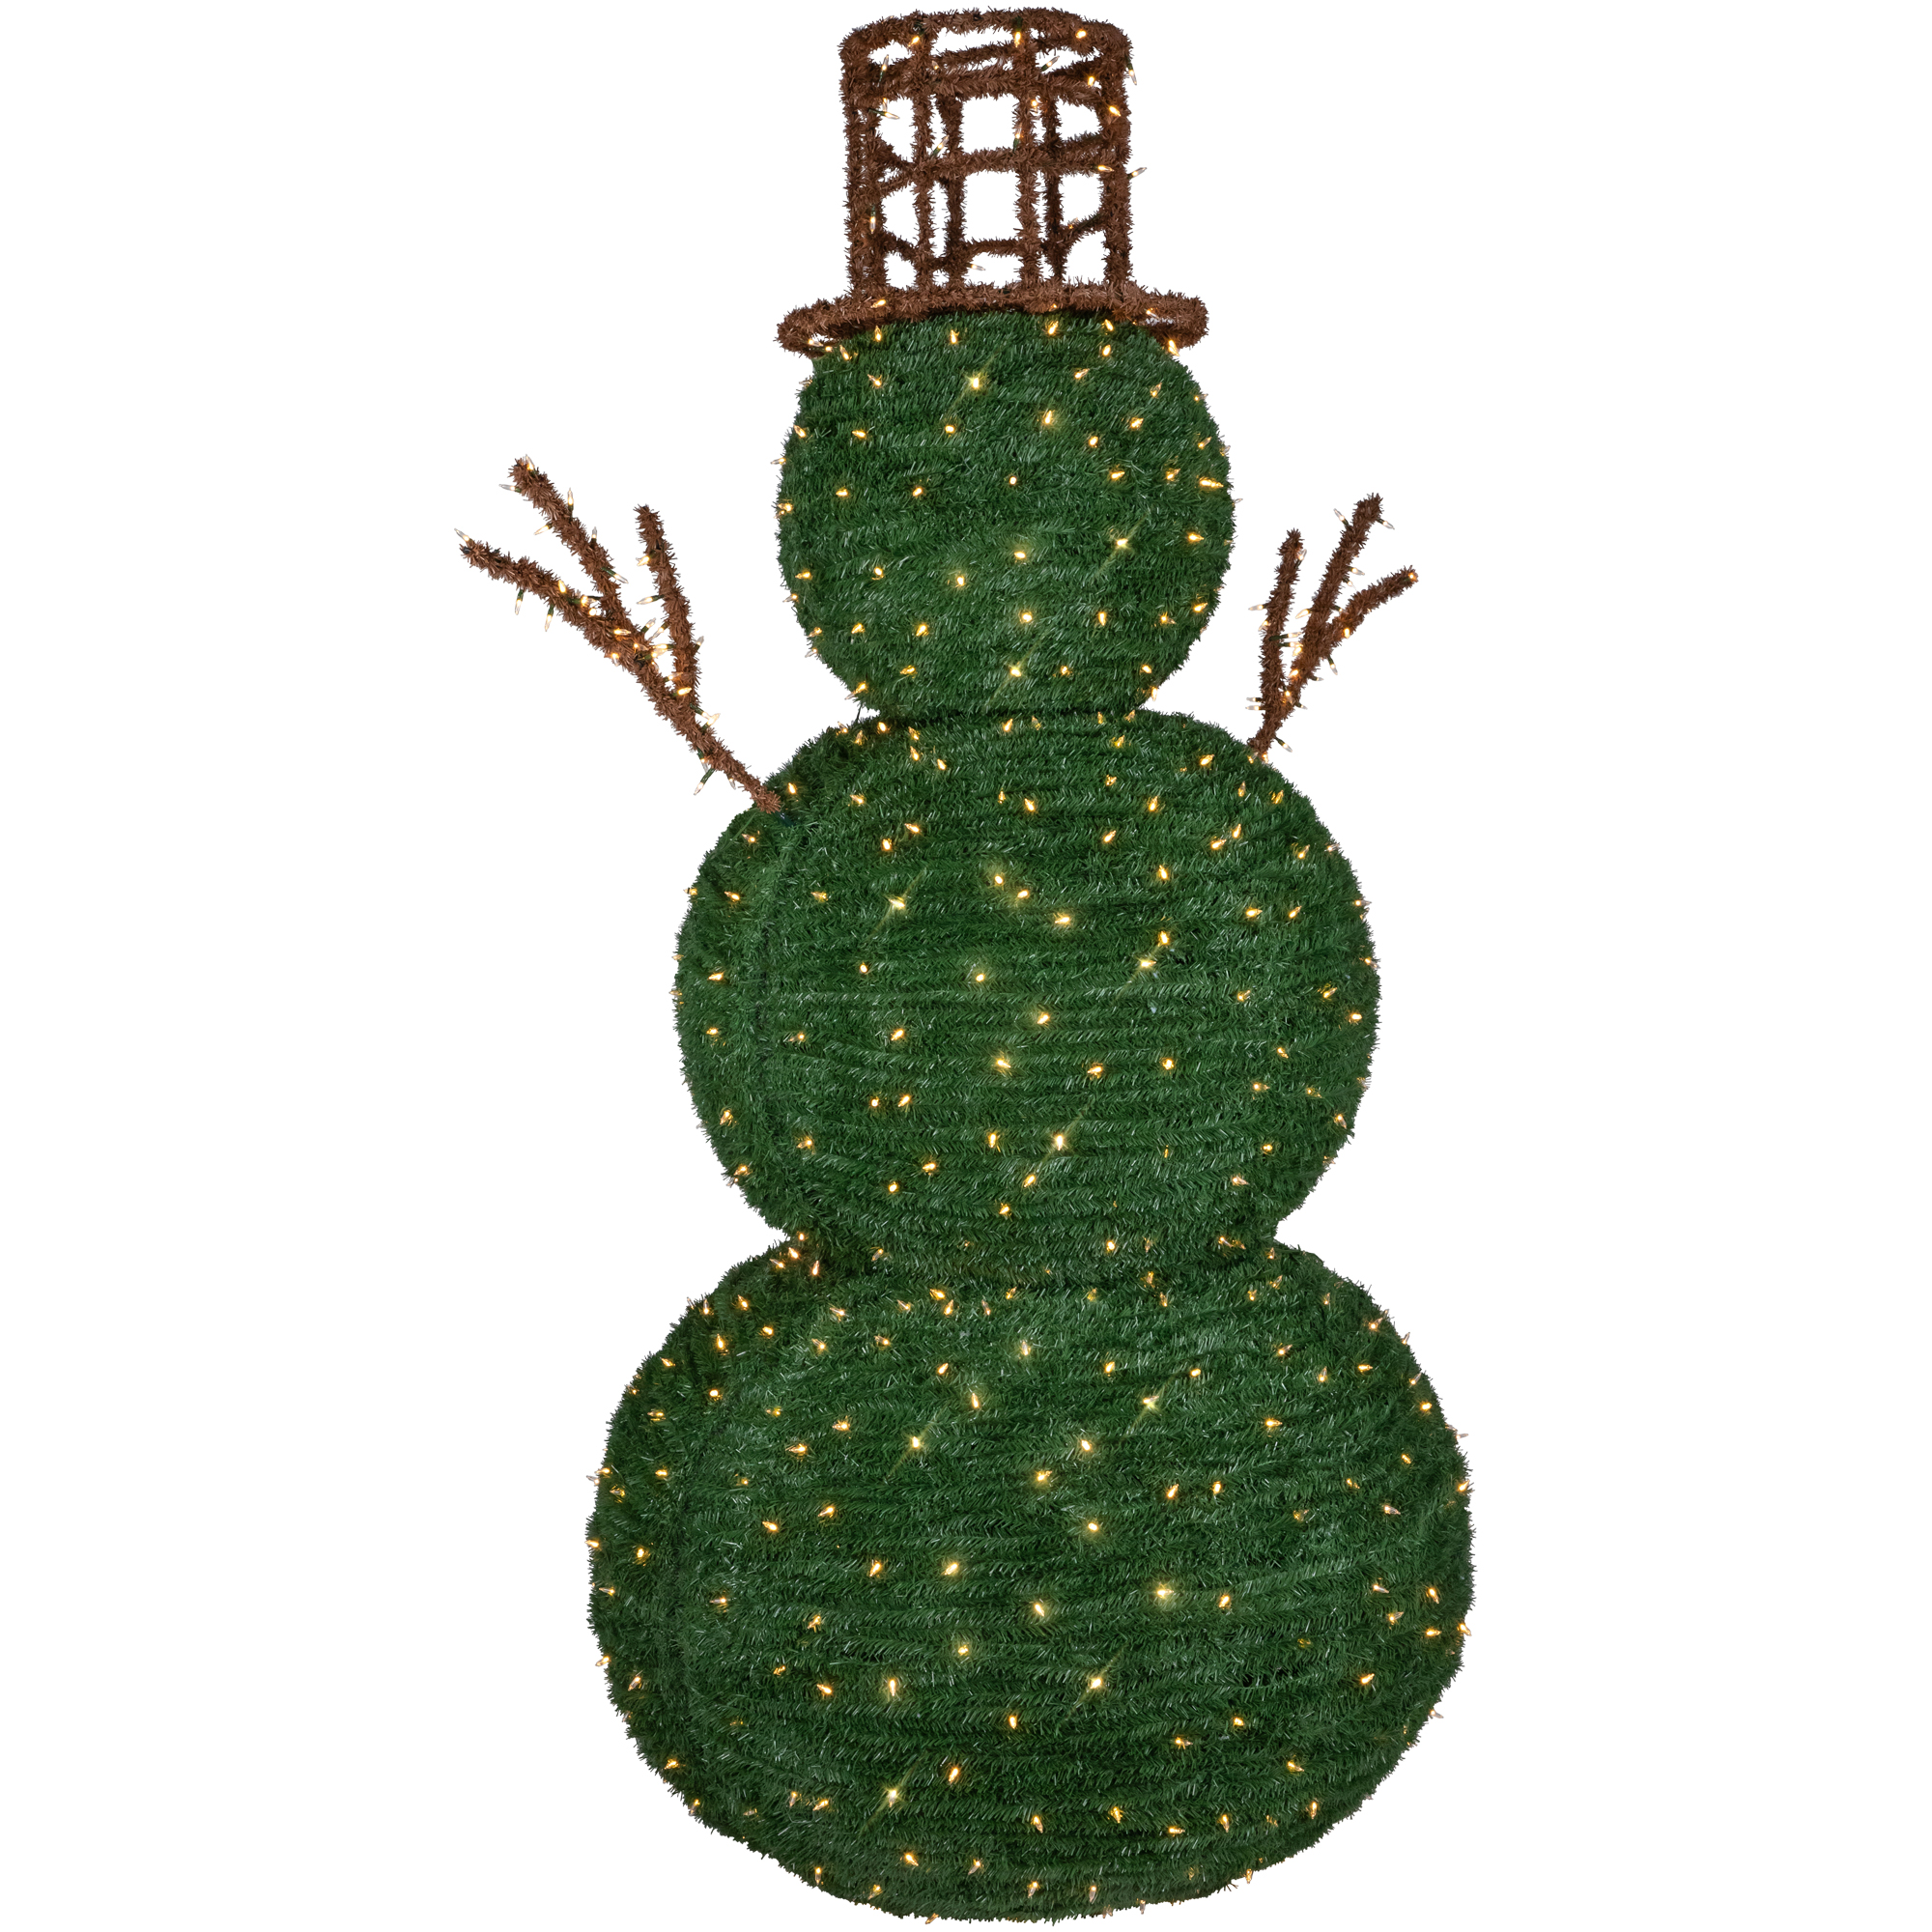 Northlight Lighted Commercial Topiary Snowman Outdoor Christmas Decoration - 6.5' - Warm White LED Lights